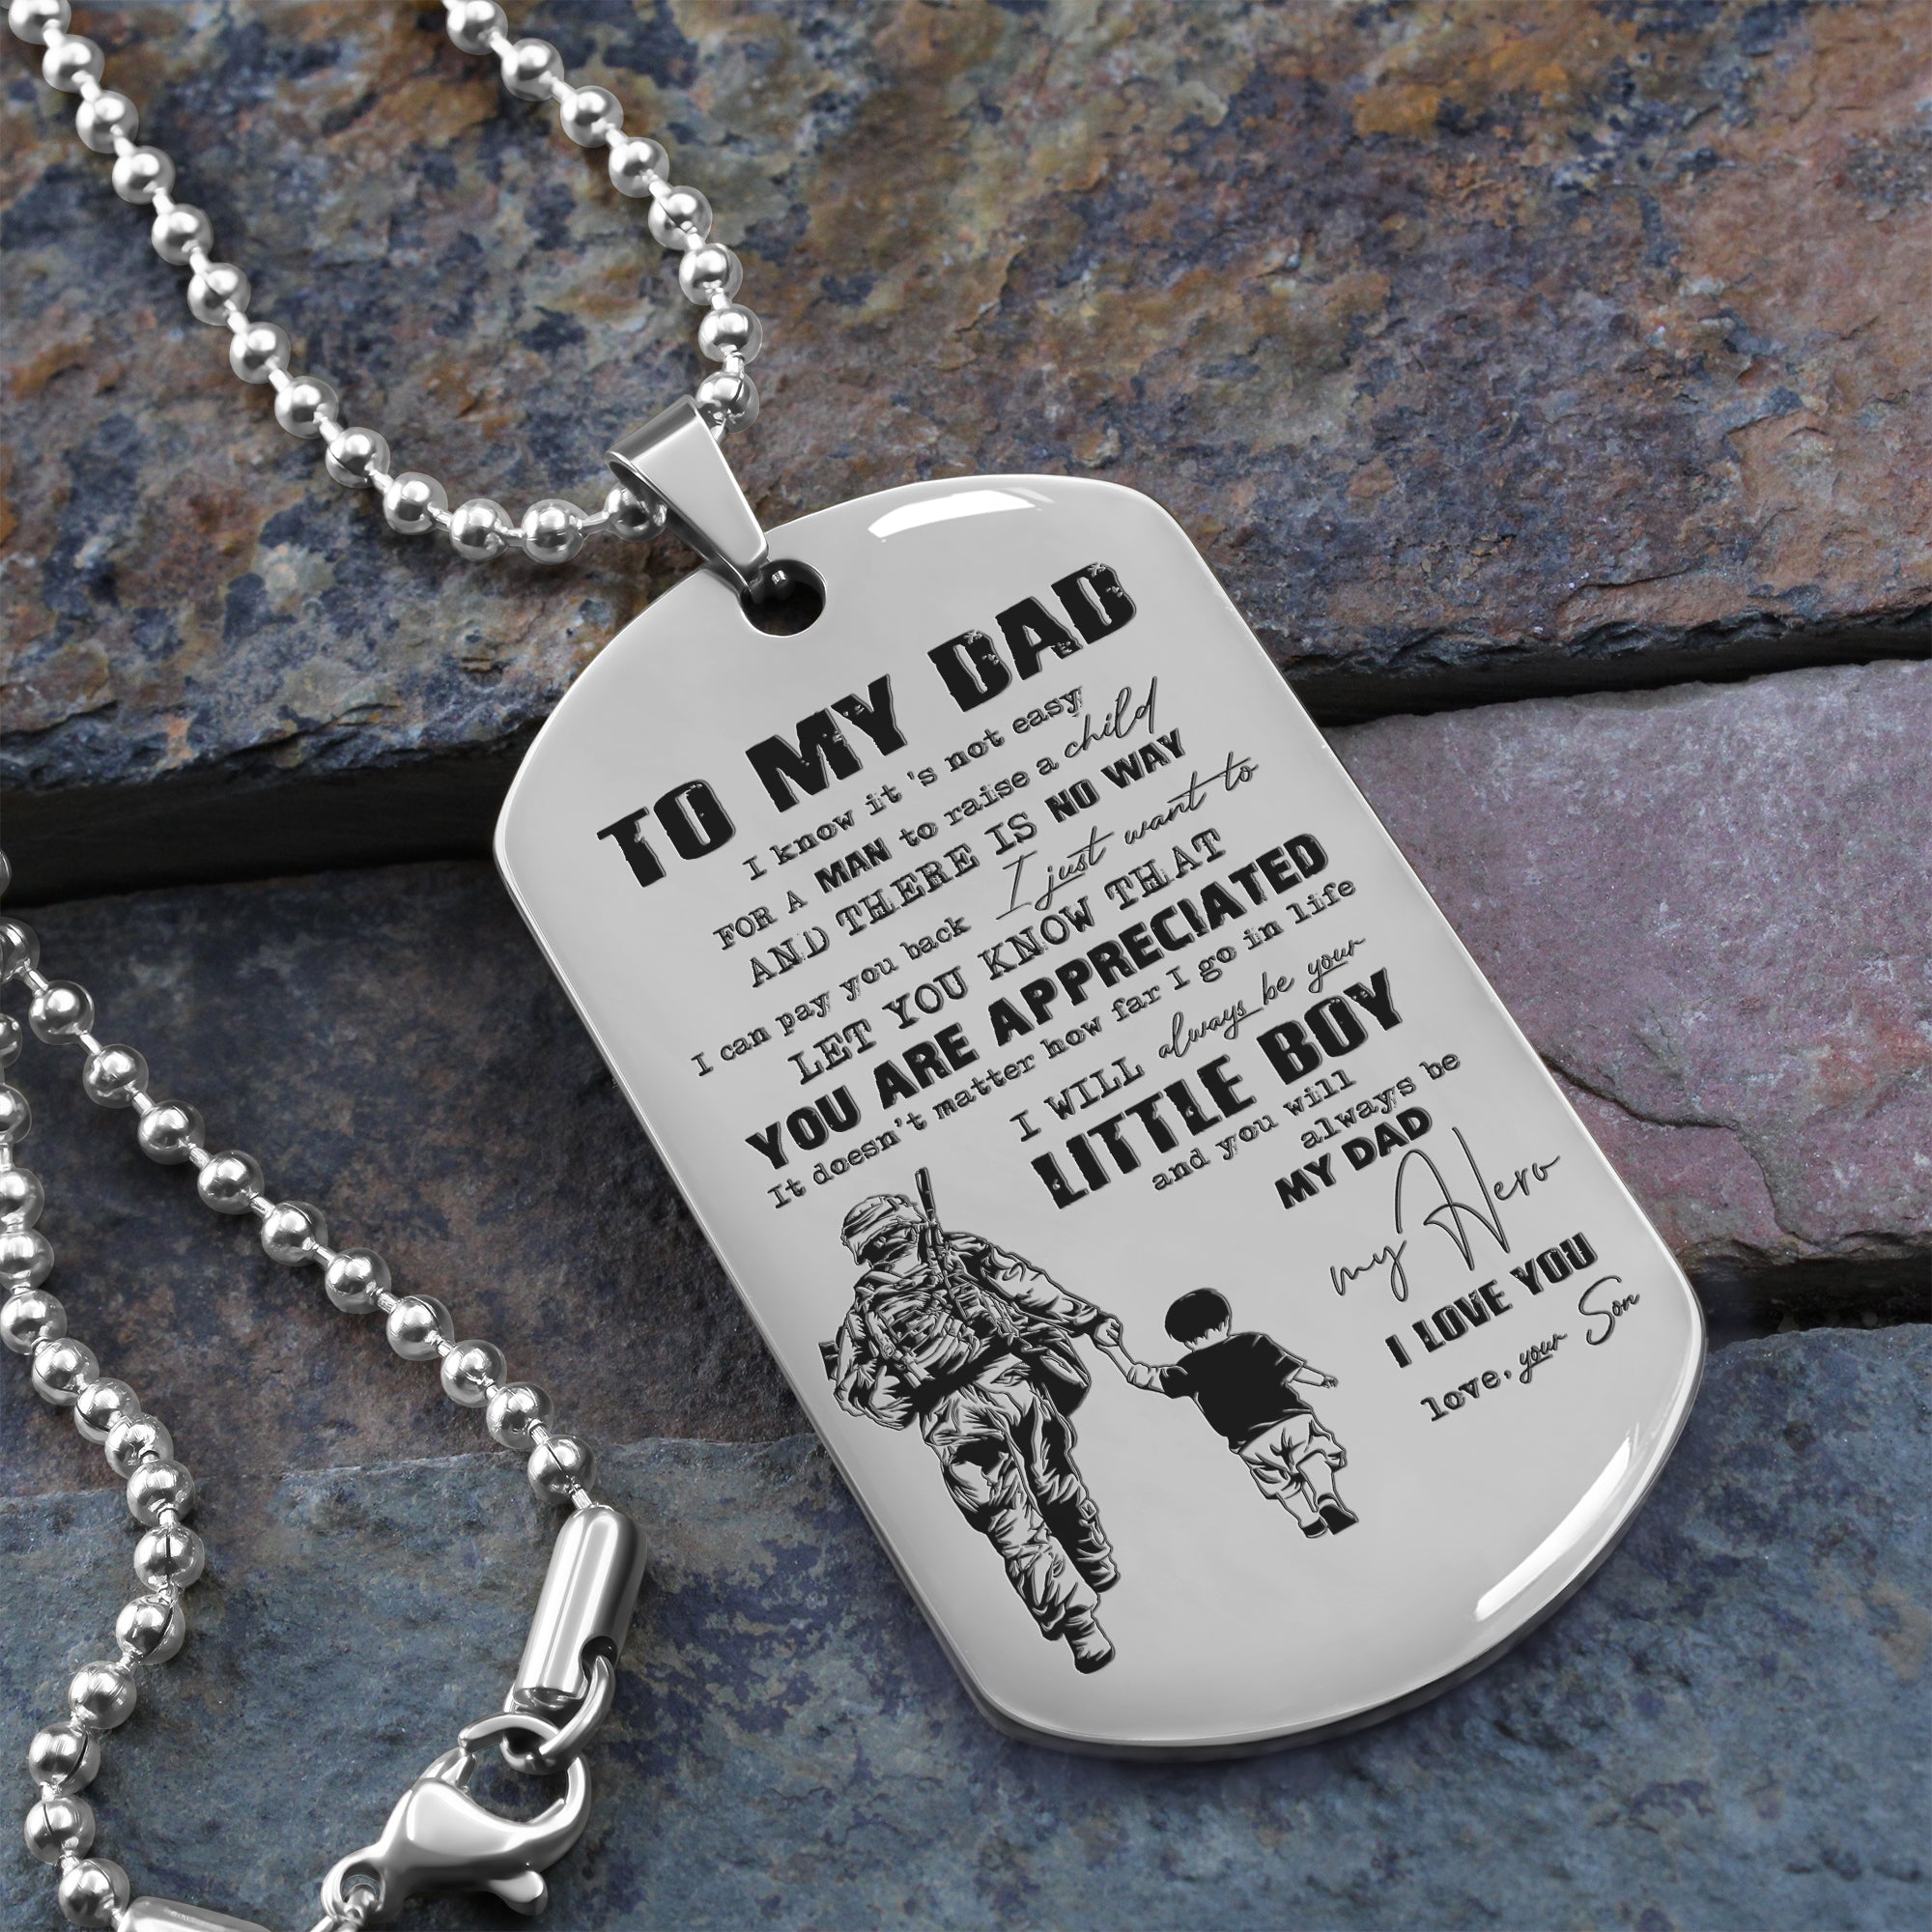 G2 - To My Dad - Son- Dog Tag  - Viking - Father's day